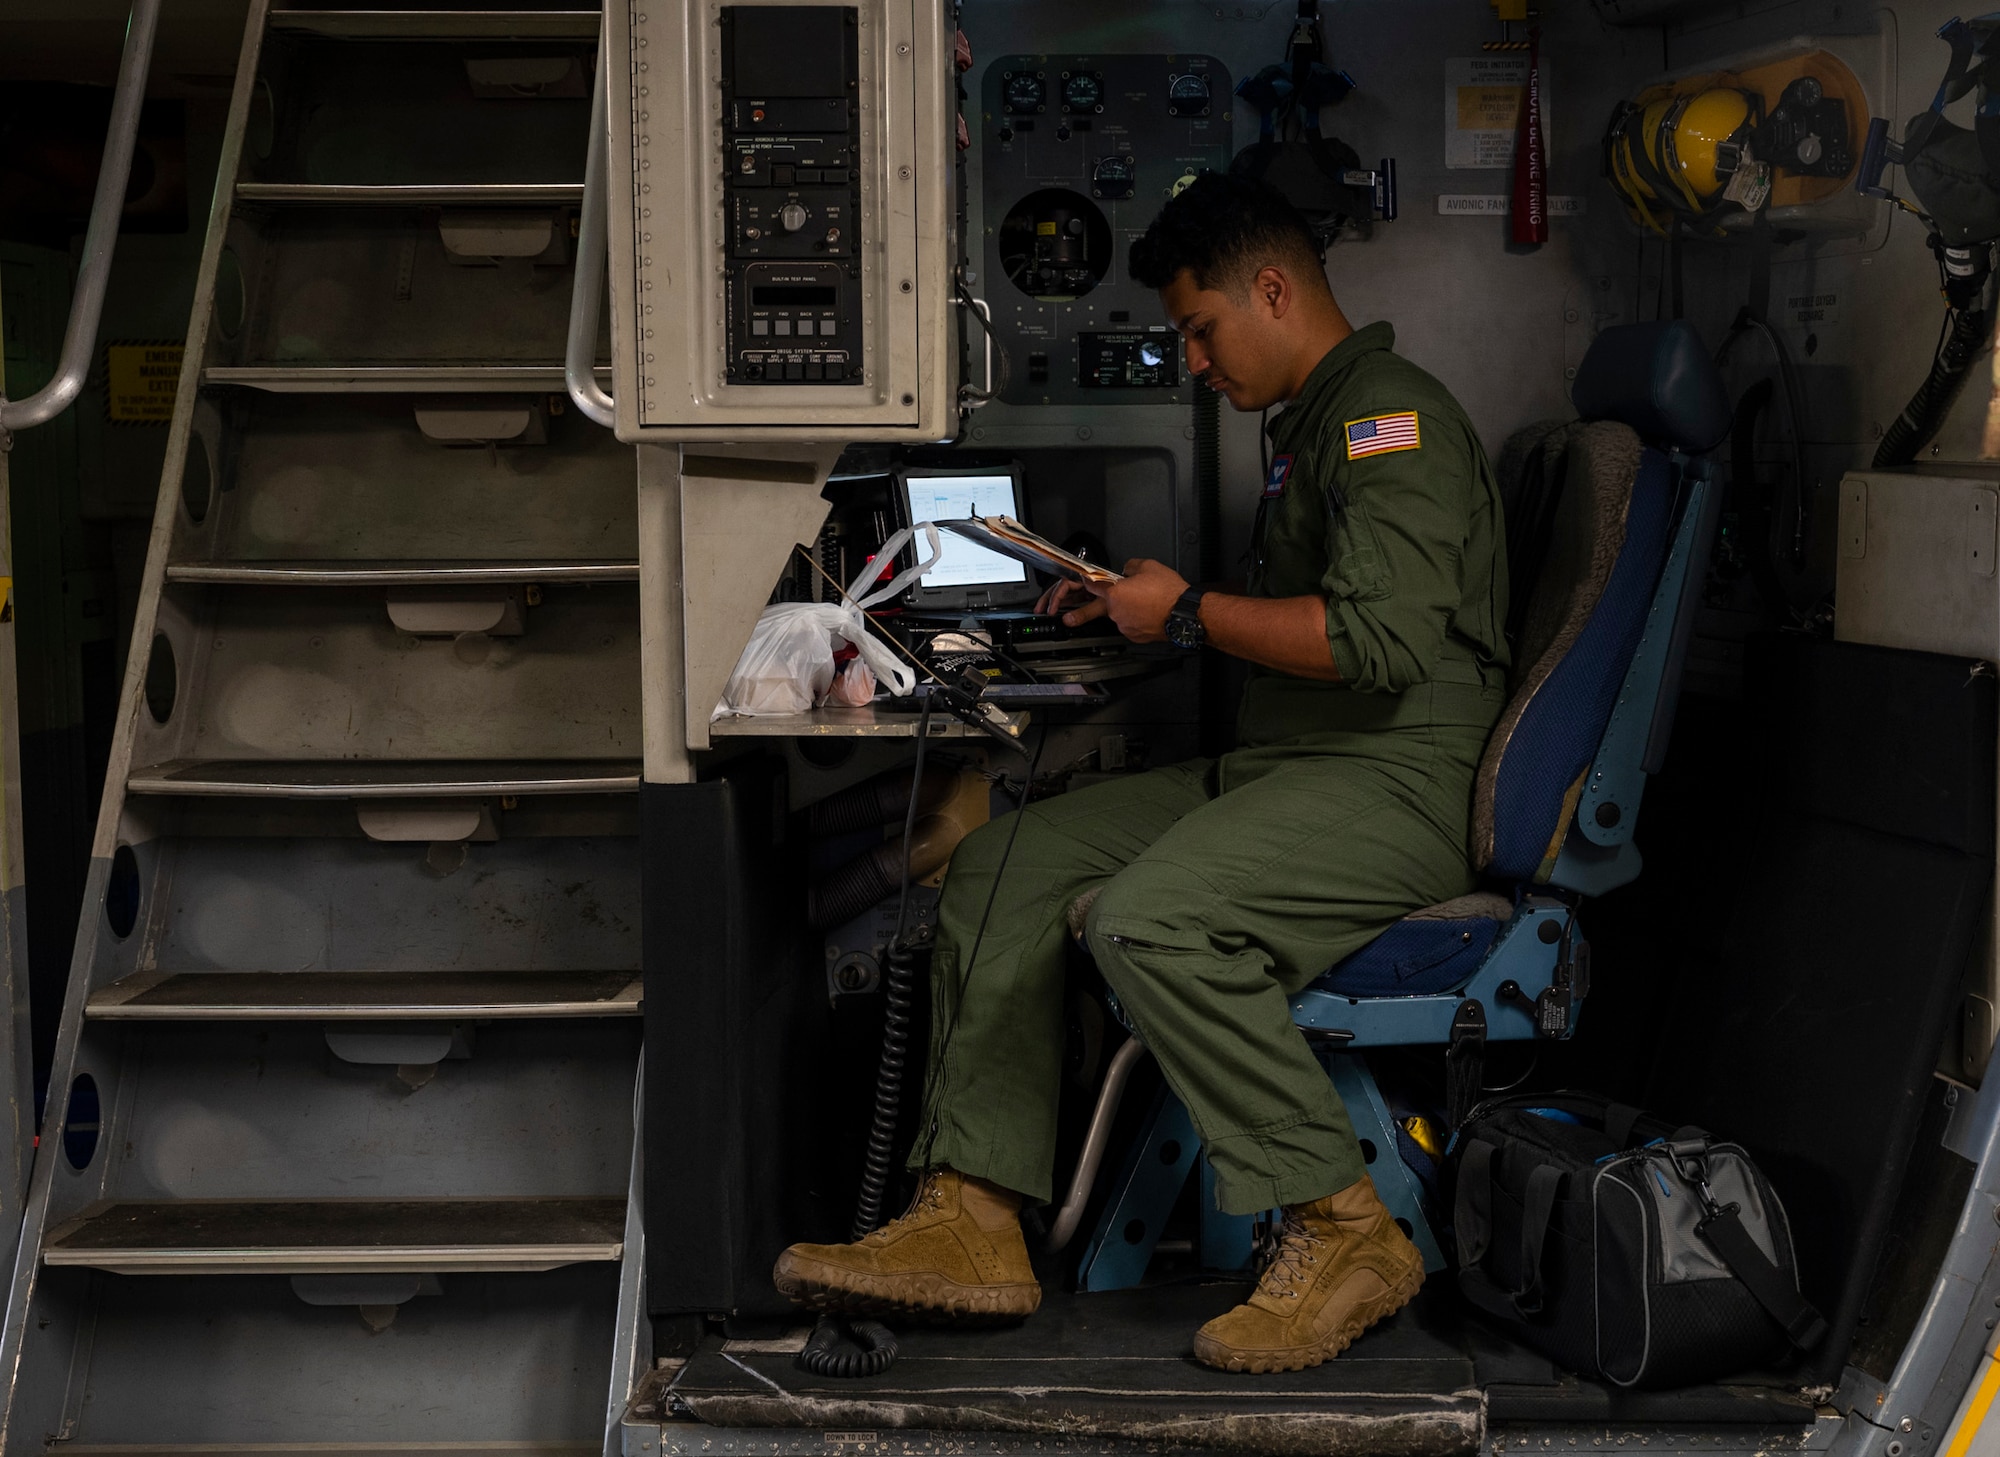 U.S. Air Force Airman 1st Class Manuel Santiago, a loadmaster with the 4th Airlift Squadron, conducts preflight checks on a C-17 Globemaster III during Exercise Rainier War 23A at Joint Base Lewis-McChord, Washington, Sept. 25, 2023. Rainier War is an annual exercise led by the 62d Airlift Wing designed to evaluate the ability to generate, employ and sustain in-garrison and forward deployed forces. These exercises are necessary in assessing and maintaining wartime operational tempos, ensuring command and control across multiple locations. During the exercise, Airmen will respond to scenarios that replicate today’s contingency operations and will address full-spectrum readiness against modern threats brought on by peer adversaries. (U.S. Air Force photo by Staff Sgt. Rachel Williams)